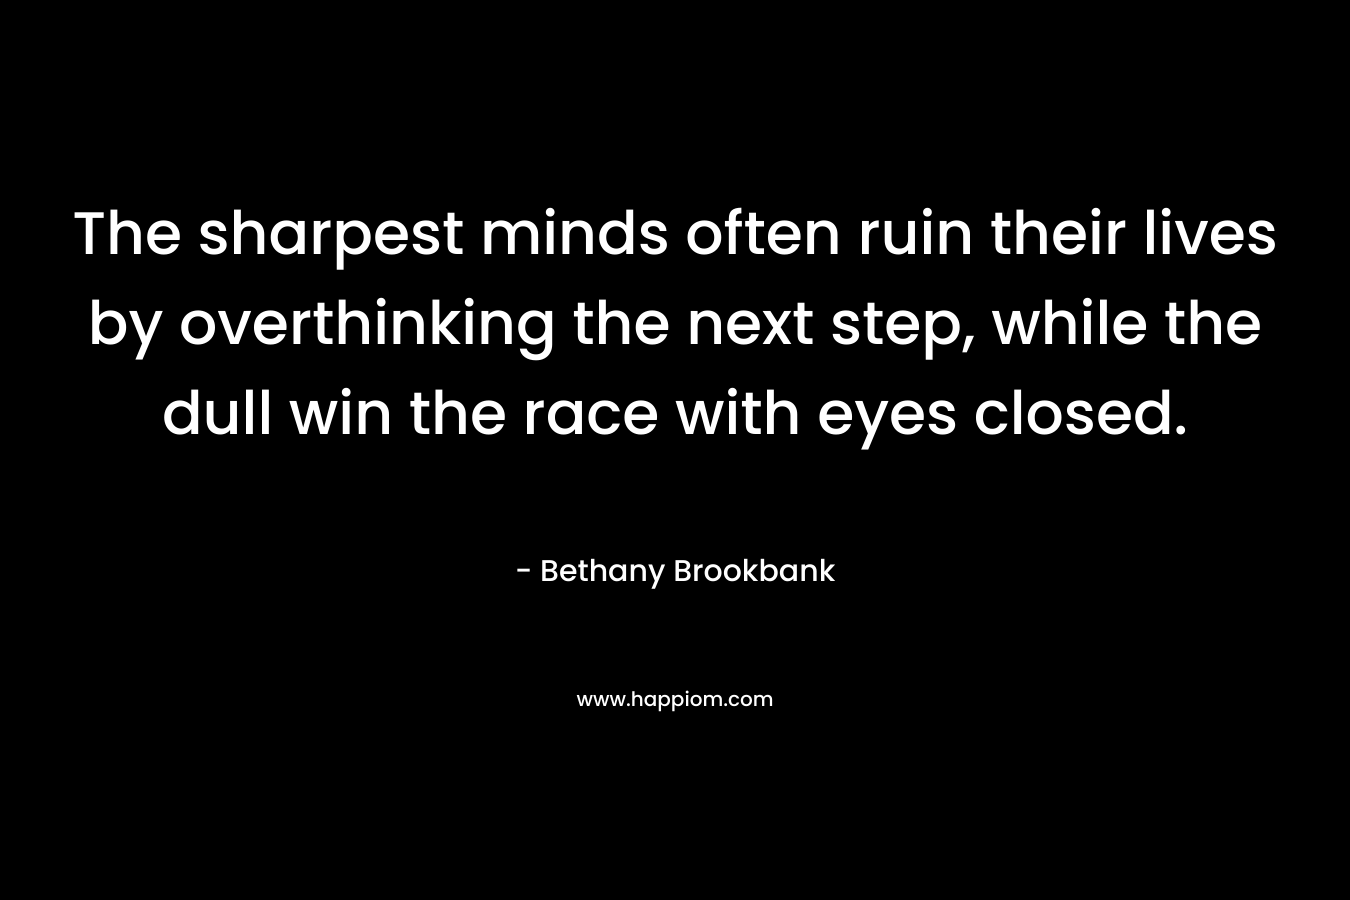 The sharpest minds often ruin their lives by overthinking the next step, while the dull win the race with eyes closed.